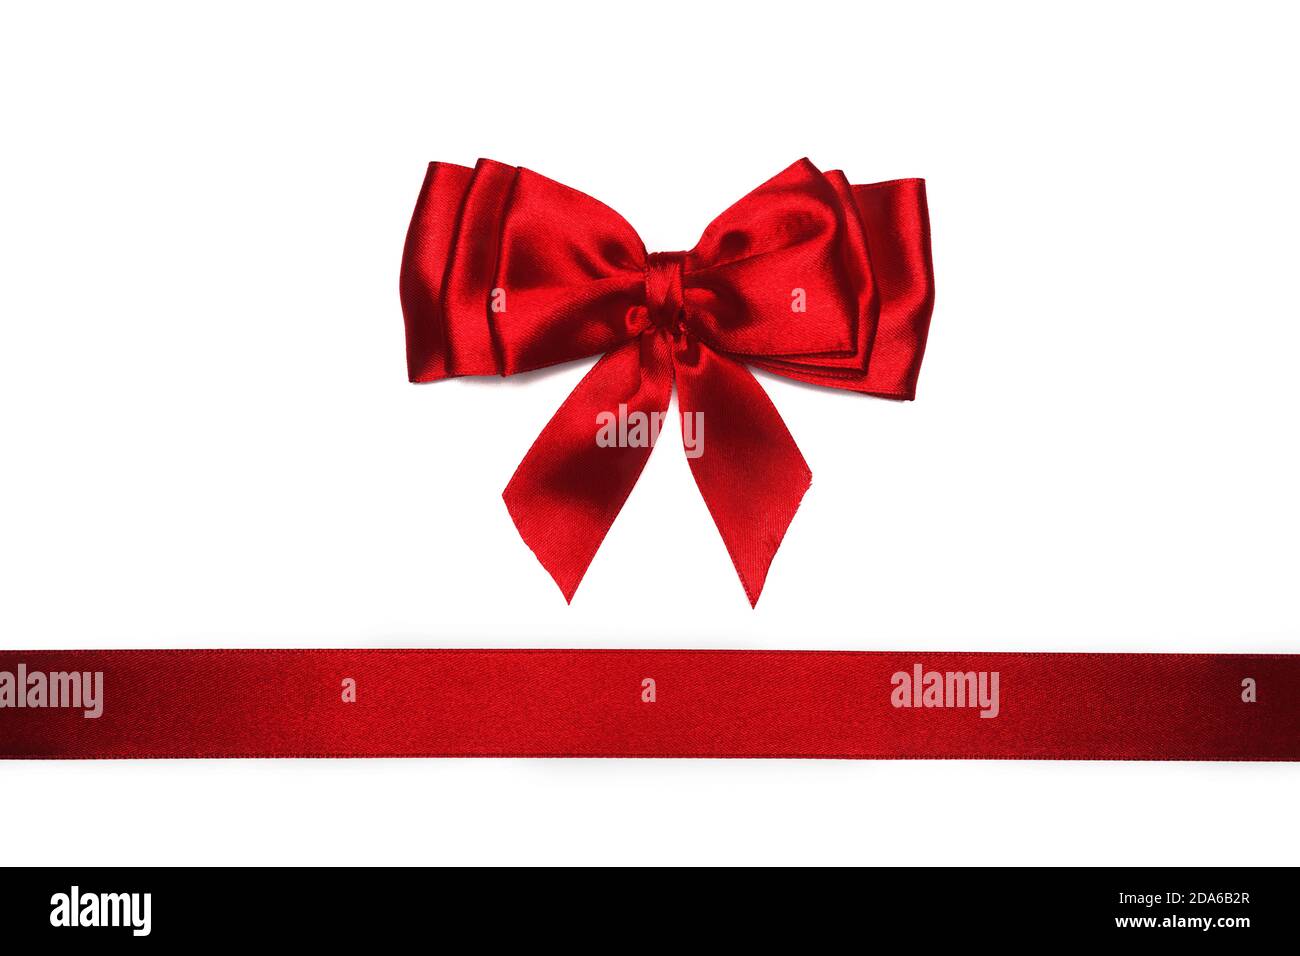 Red satin bow and ribbon on white background Stock Photo